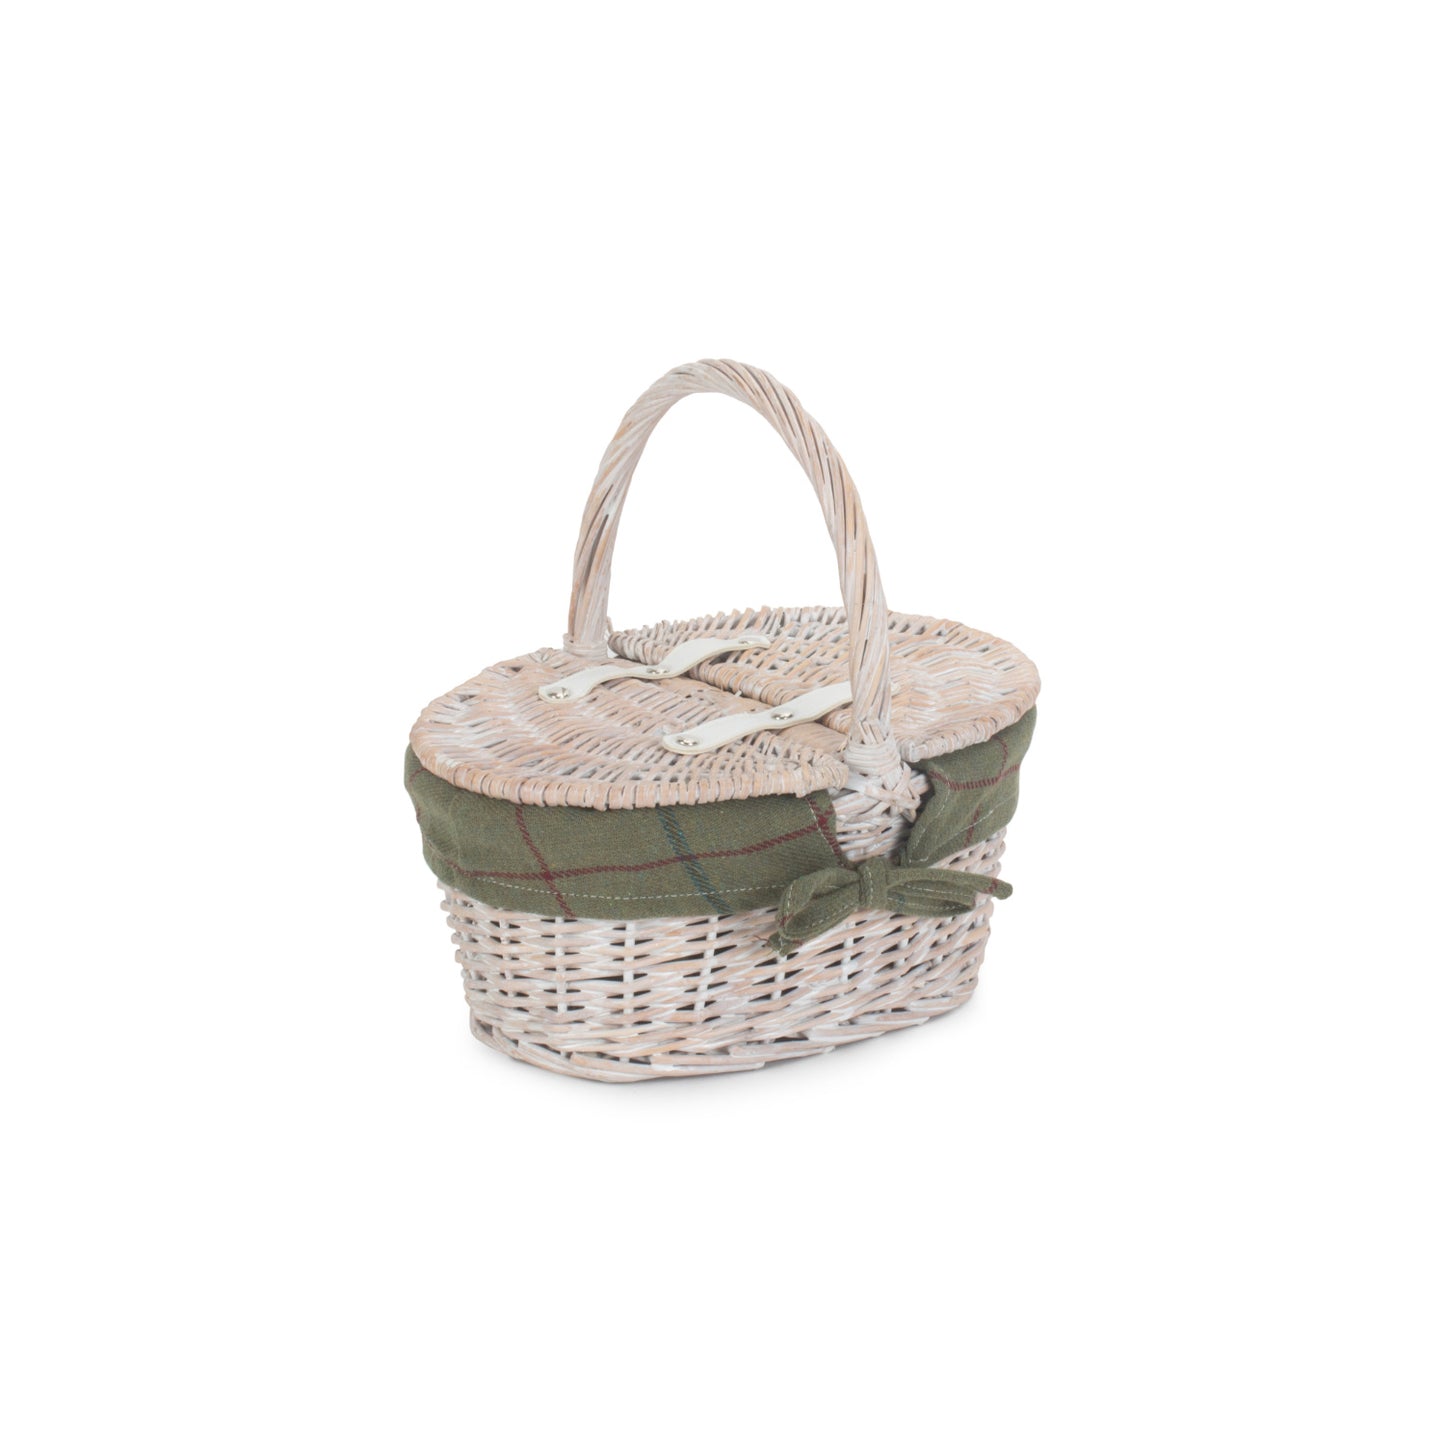 Child's White Wash Lidded Hamper With Green Tweed Lining